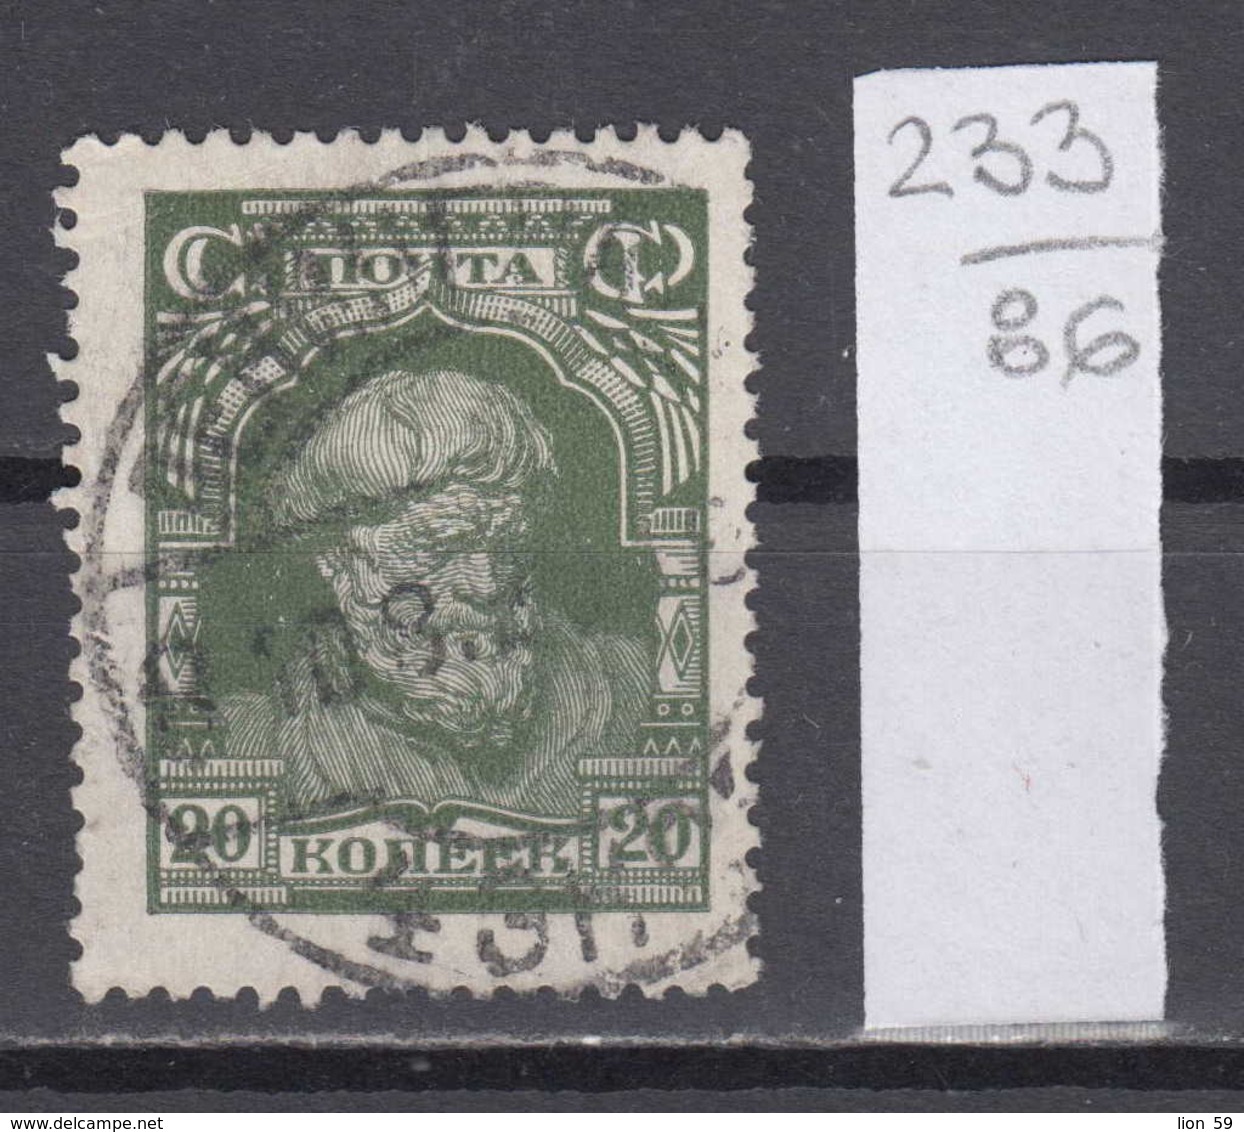 86K233 / 1927 - Michel Nr. 349 - 20 K. Bdr. , OWz. , Ks 13 1/2 , Bauer , Used ( O ) Russia Russie - Used Stamps